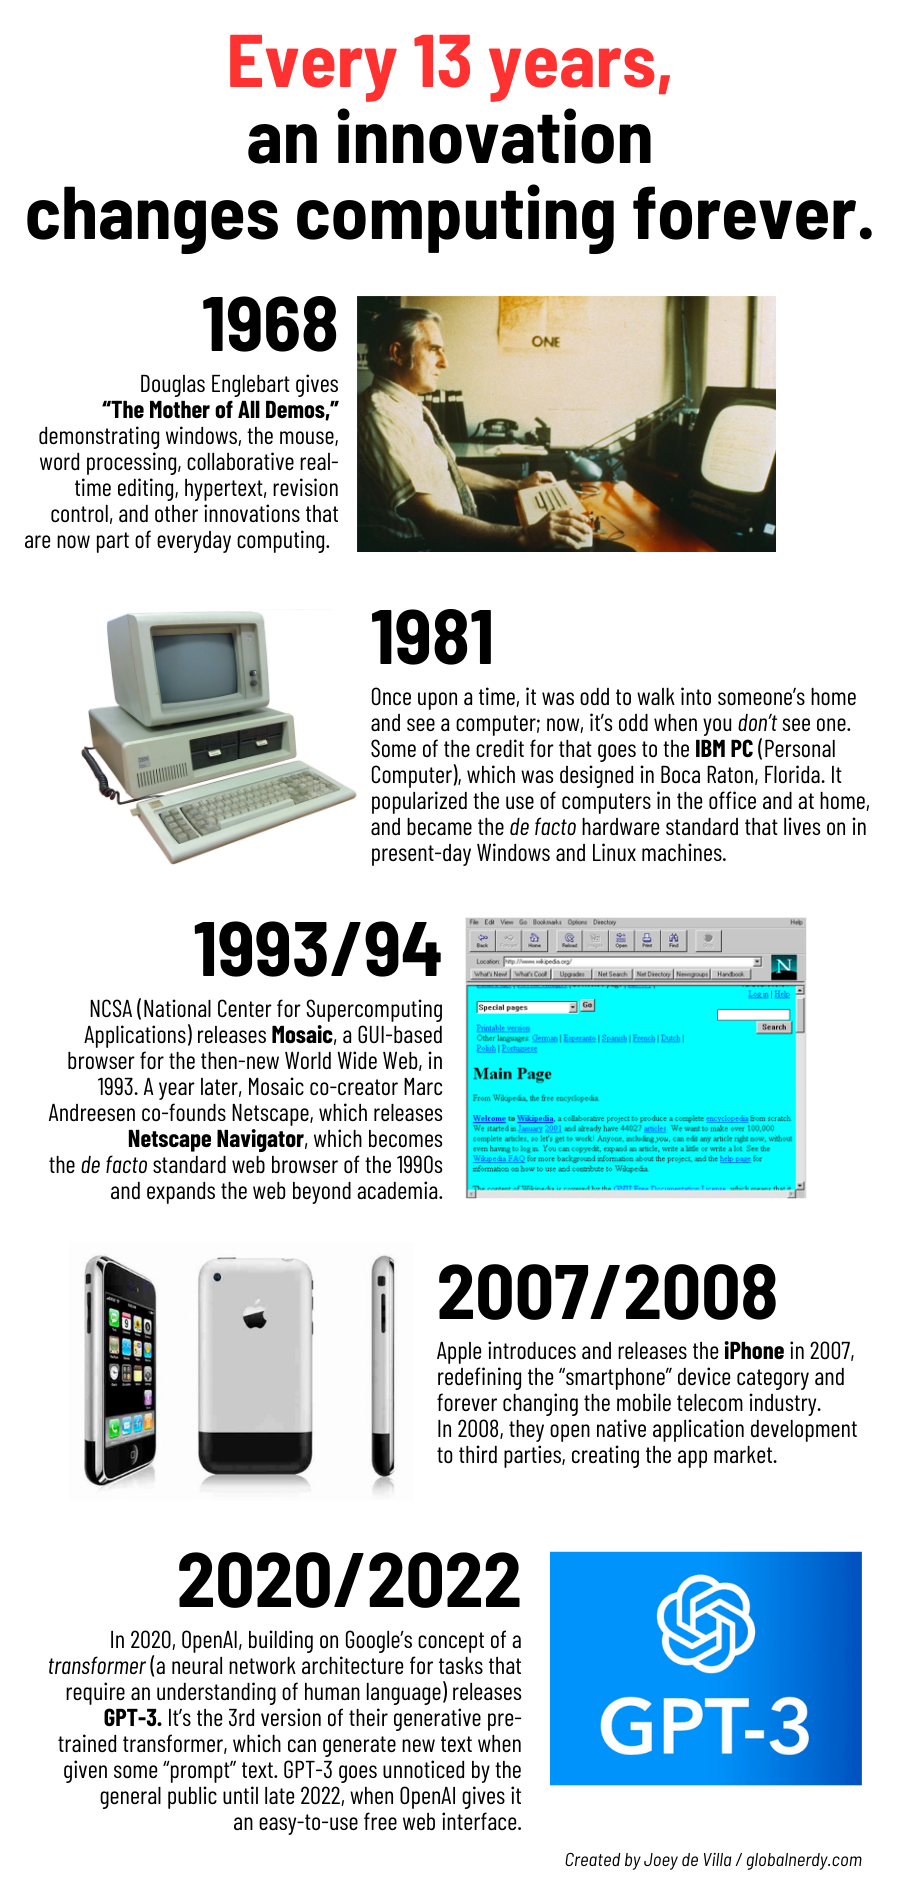 Infographic titled “Every 13 years, an innovation changes computing forever.” The infographic shows “The Mother of All Demos (1968),” “IBM PC (1981),” “Mosaic and Netscape Navigator (1993/1994),” “iPhone (2007/2008),” and “GPT-3 (2020/2022)”.